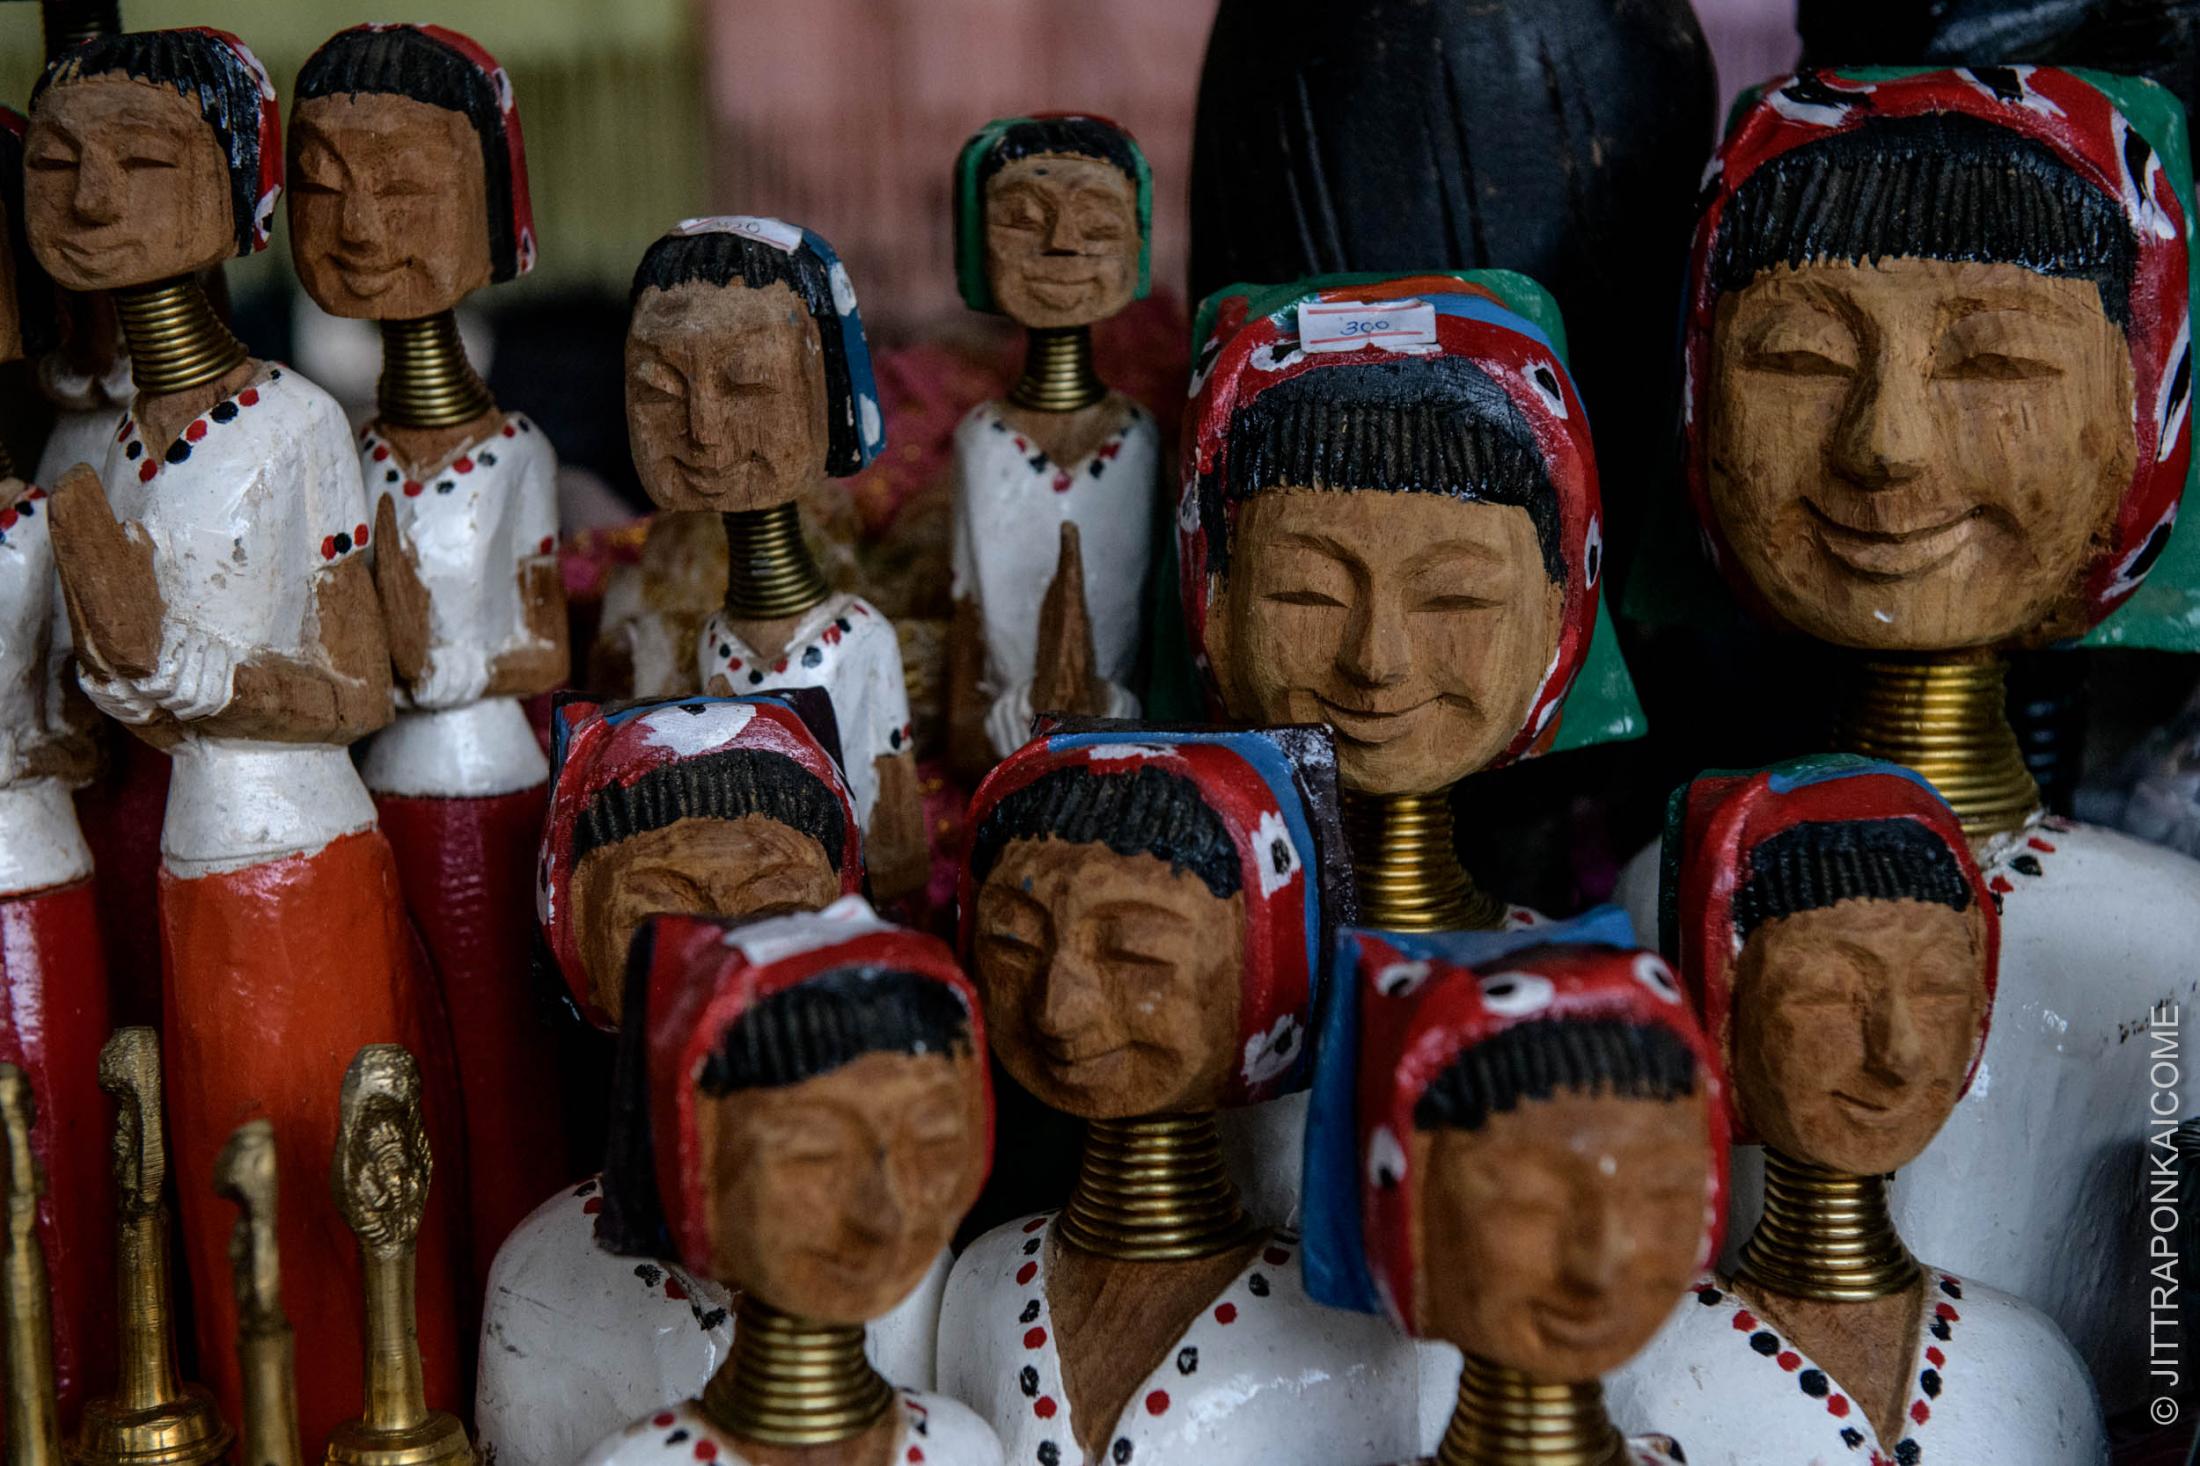 Kayan Long Neck Refugee - Wood carving souvenirs of a long neck woman are left in a...